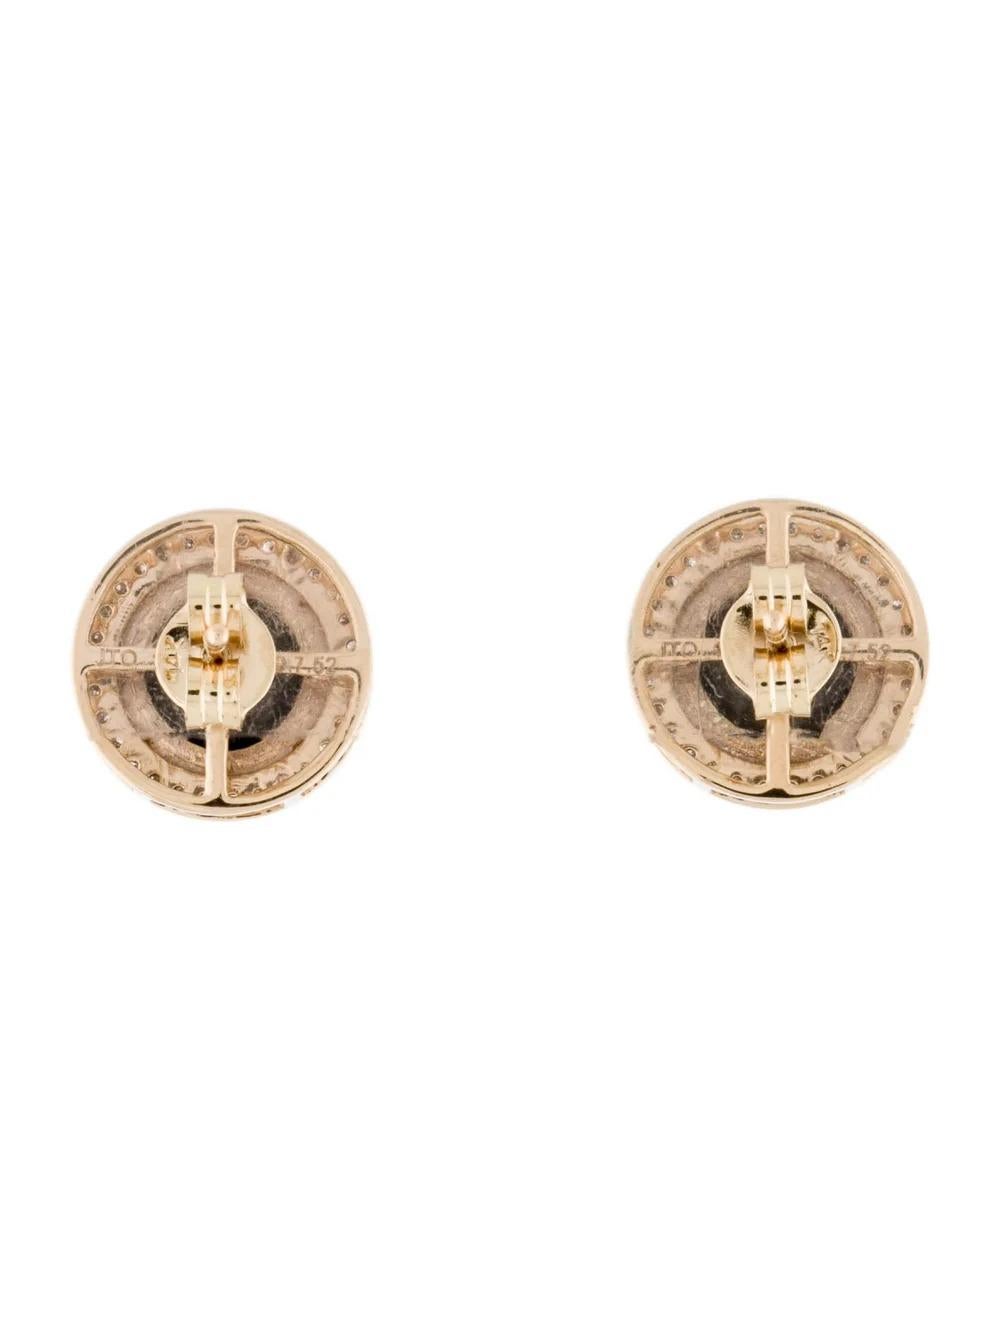 14K Diamond Stud Earrings 5.48ctw - Timeless & Elegant Statement Jewelry In New Condition For Sale In Holtsville, NY